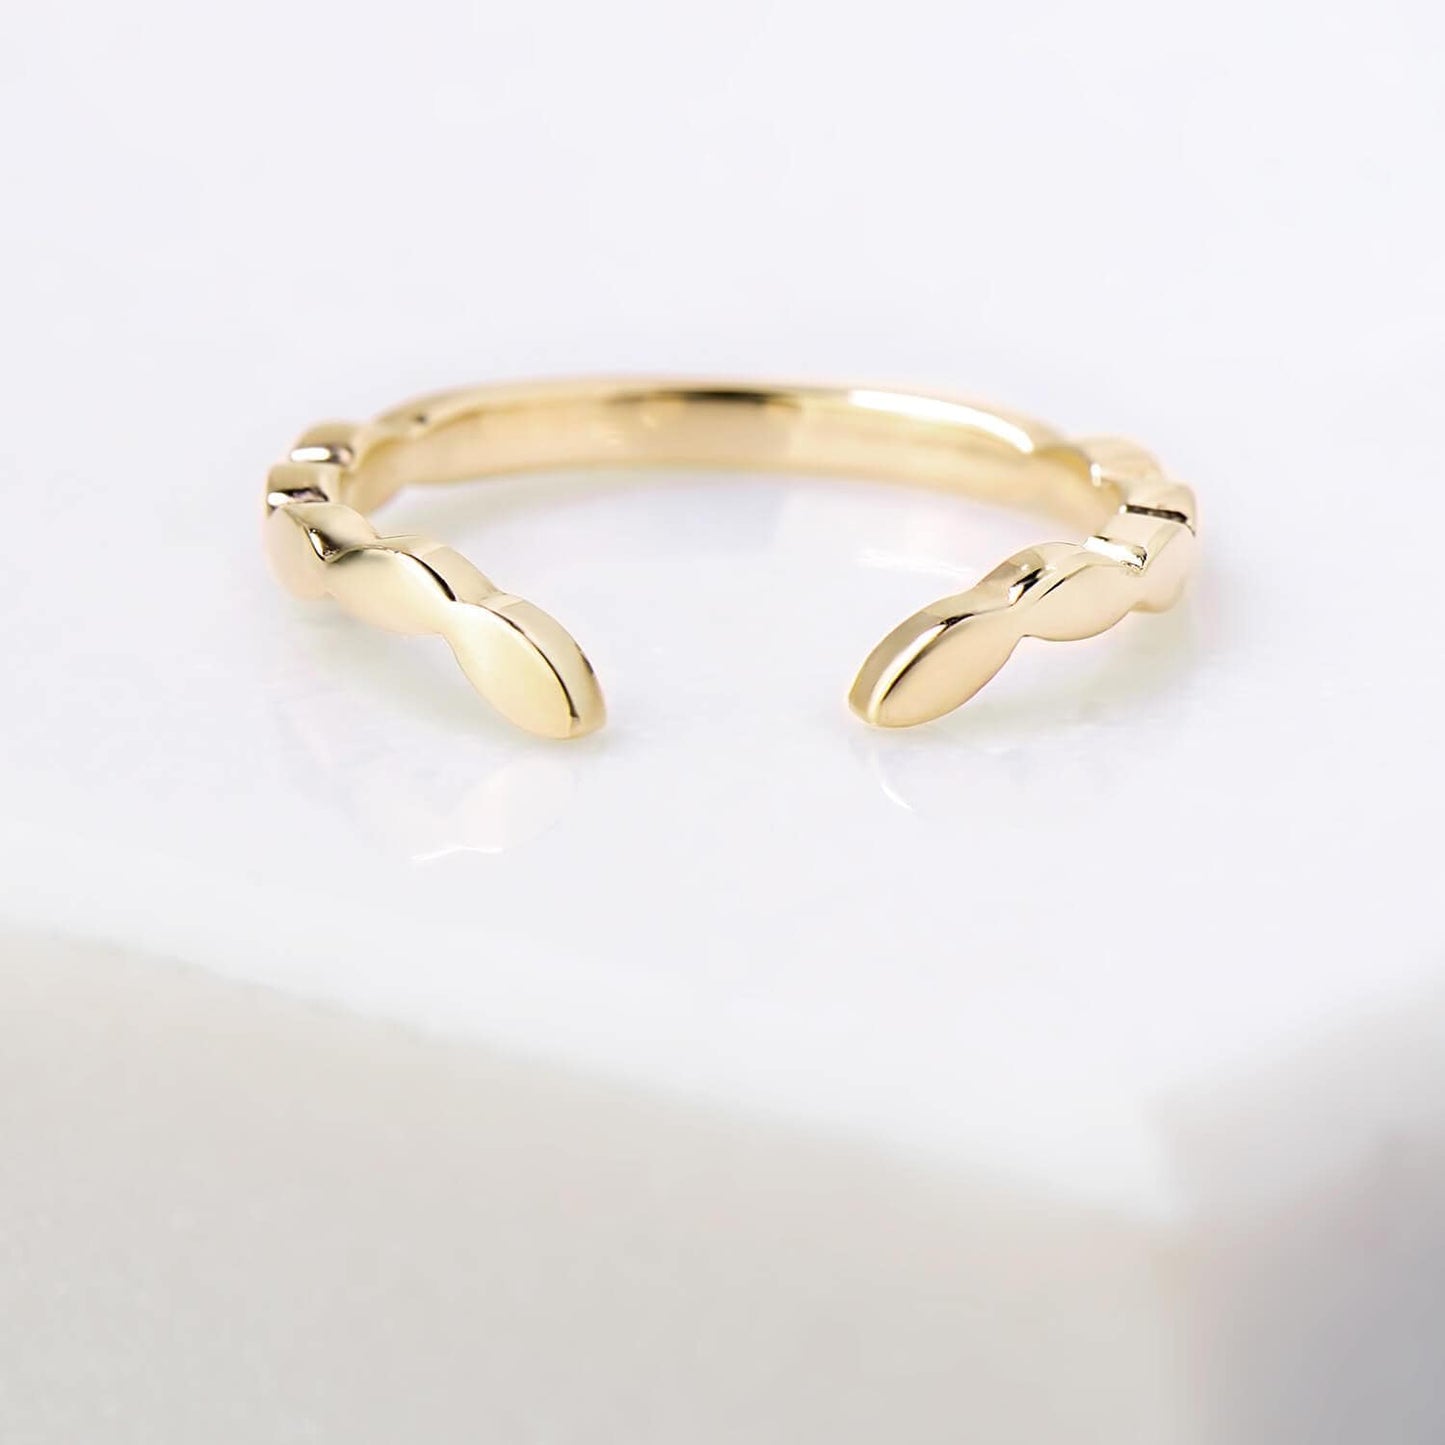 Chevron leaf profile, mirror finished 2 millimetre wide ring in 14 karat recycled yellow gold.